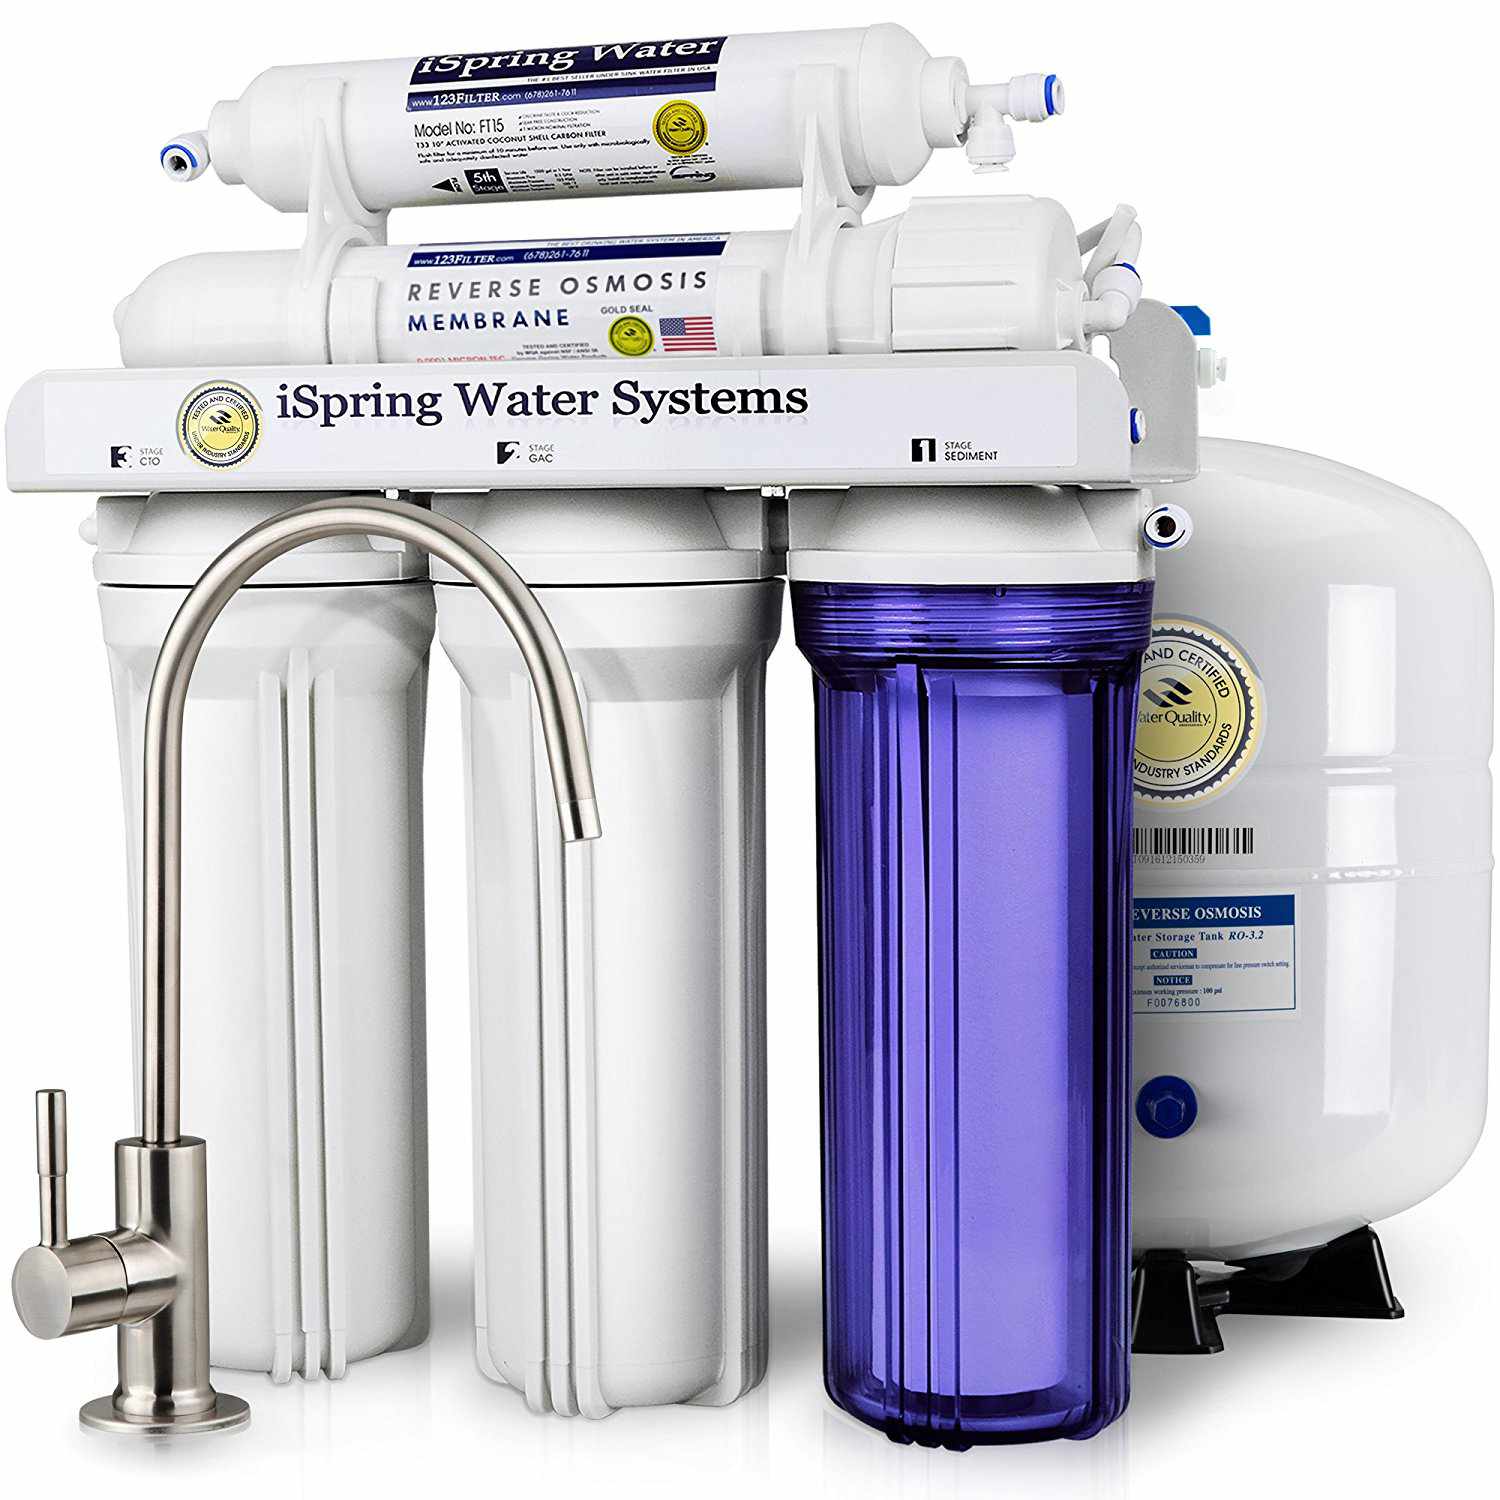 ispring water filter system